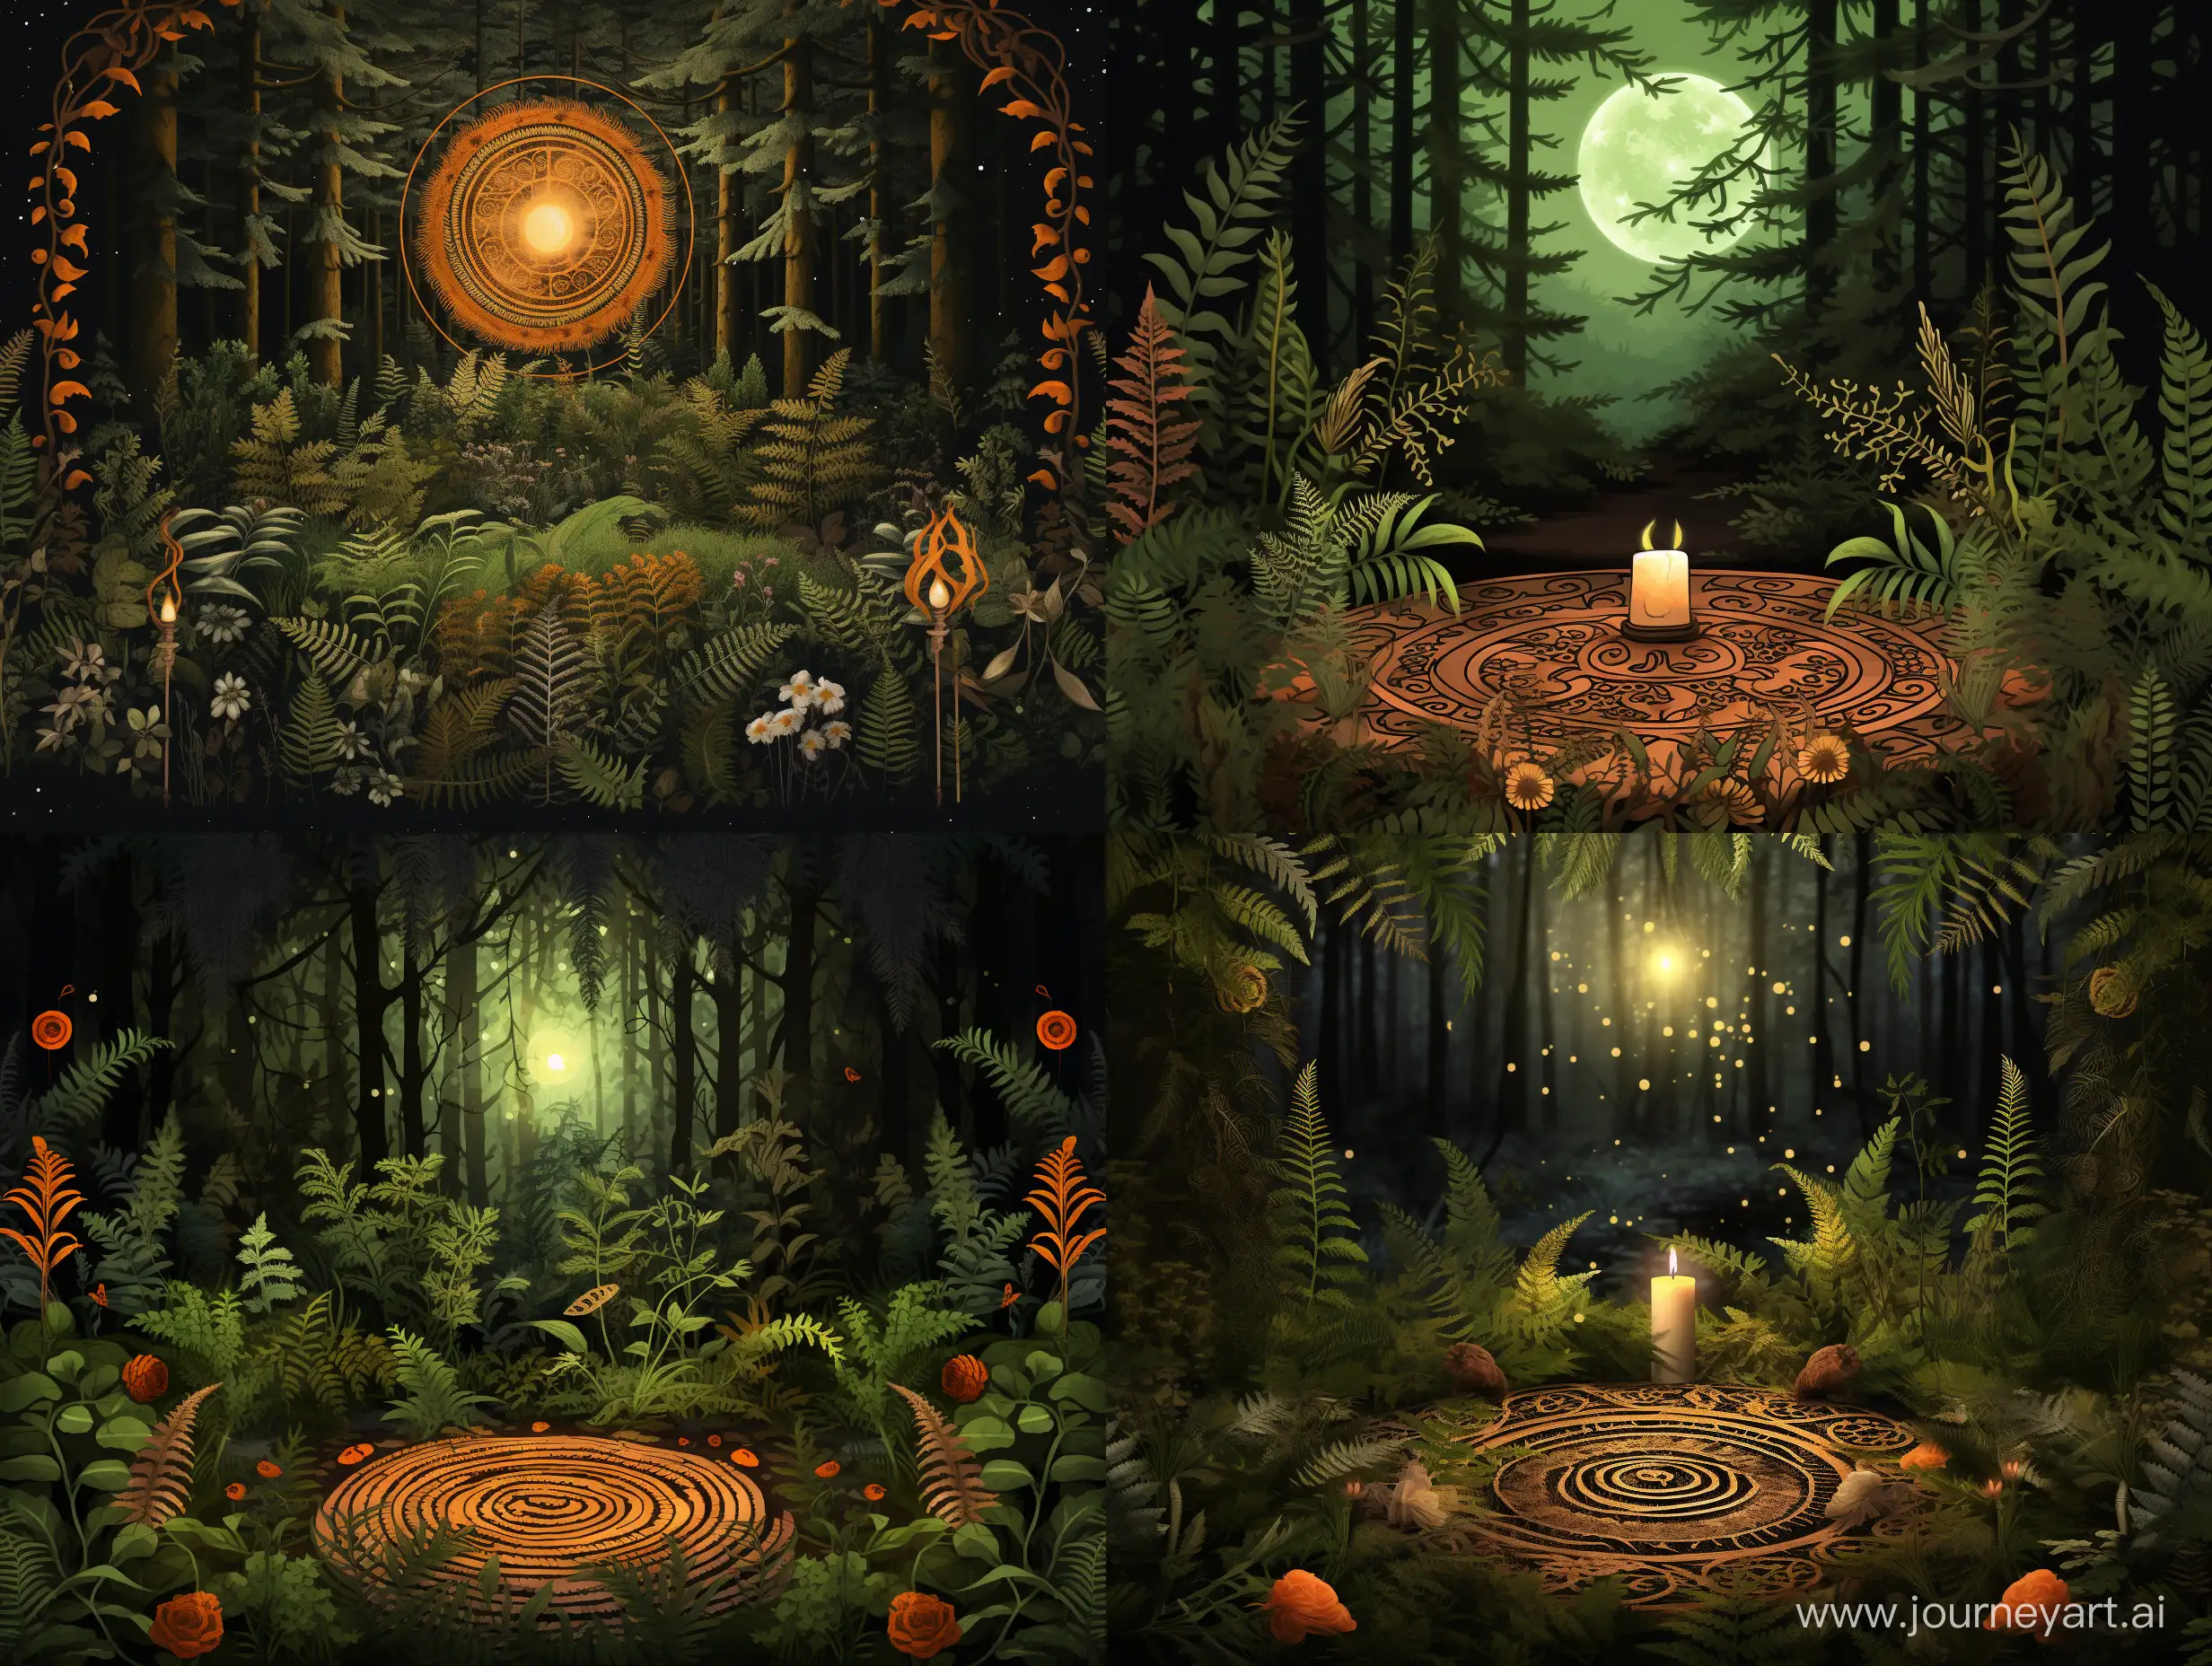 Enchanting-Night-Scene-Fern-Carpet-Glowing-Flowers-and-Forest-Creatures